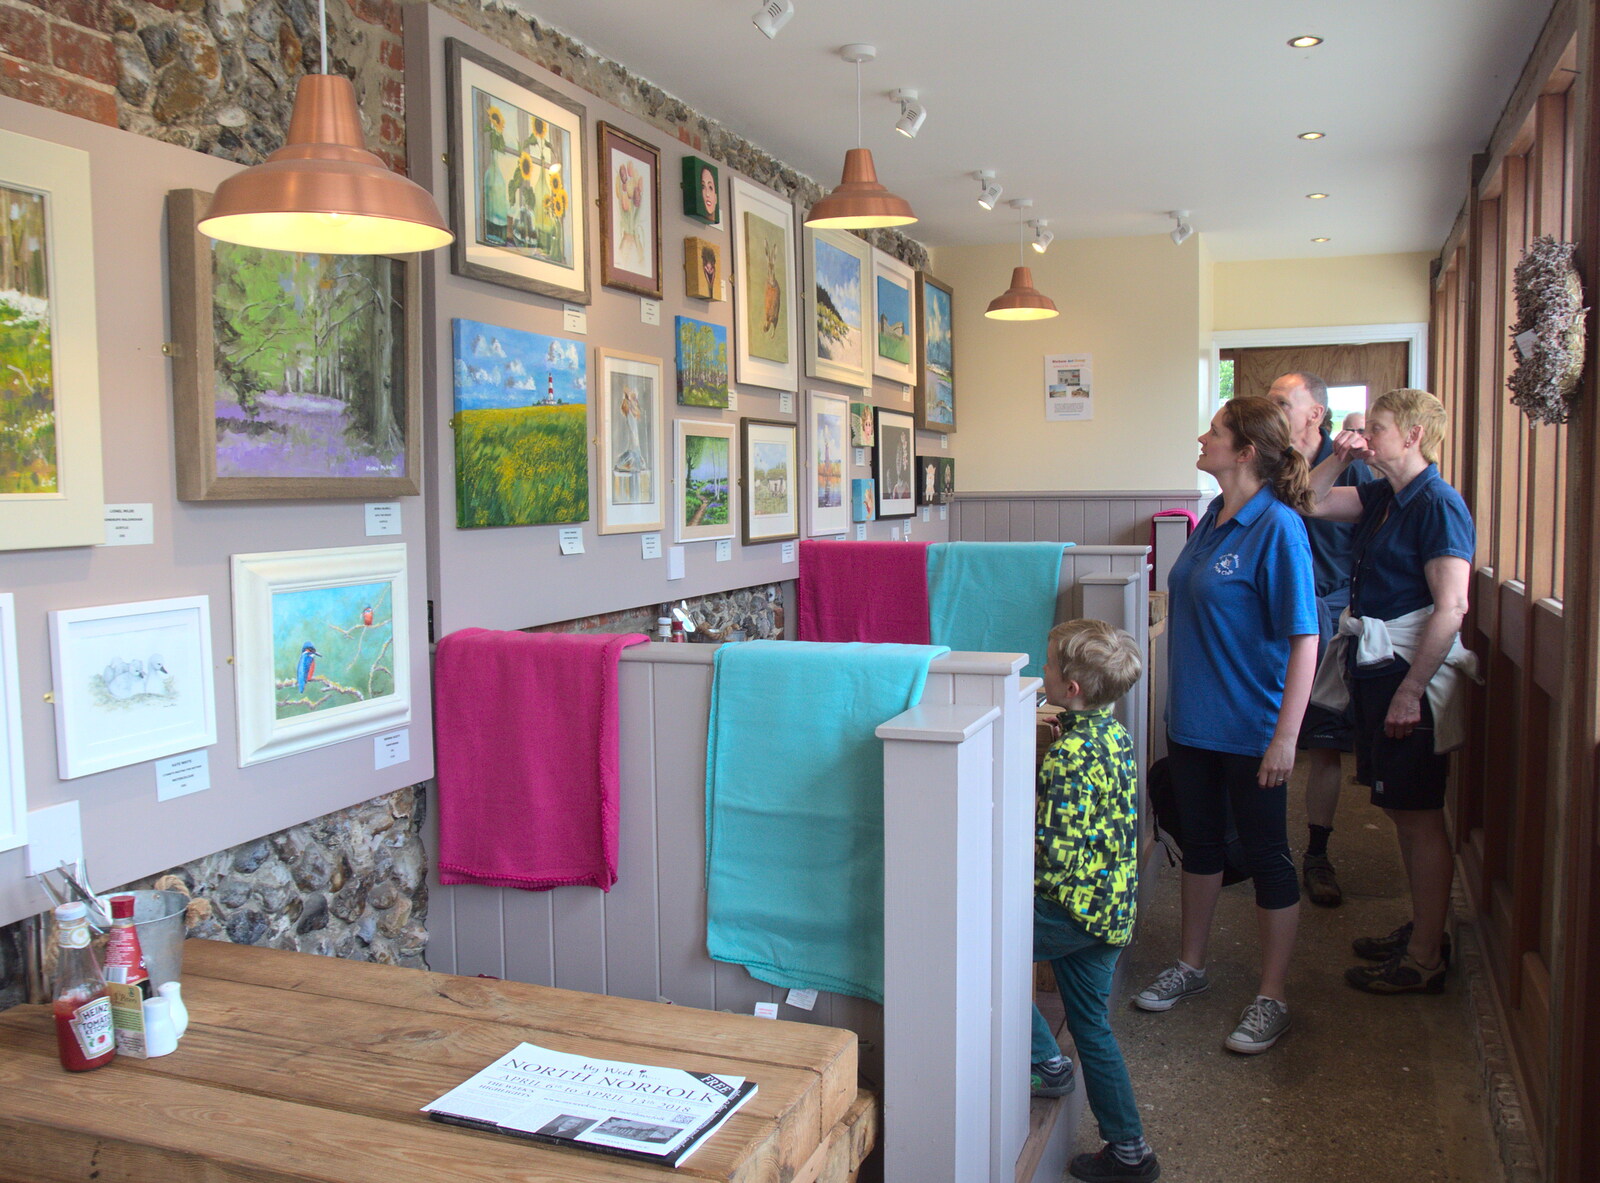 The Chequers has an art gallery thing going on from The BSCC Weekend Away, Holt, Norfolk - 12th May 2018